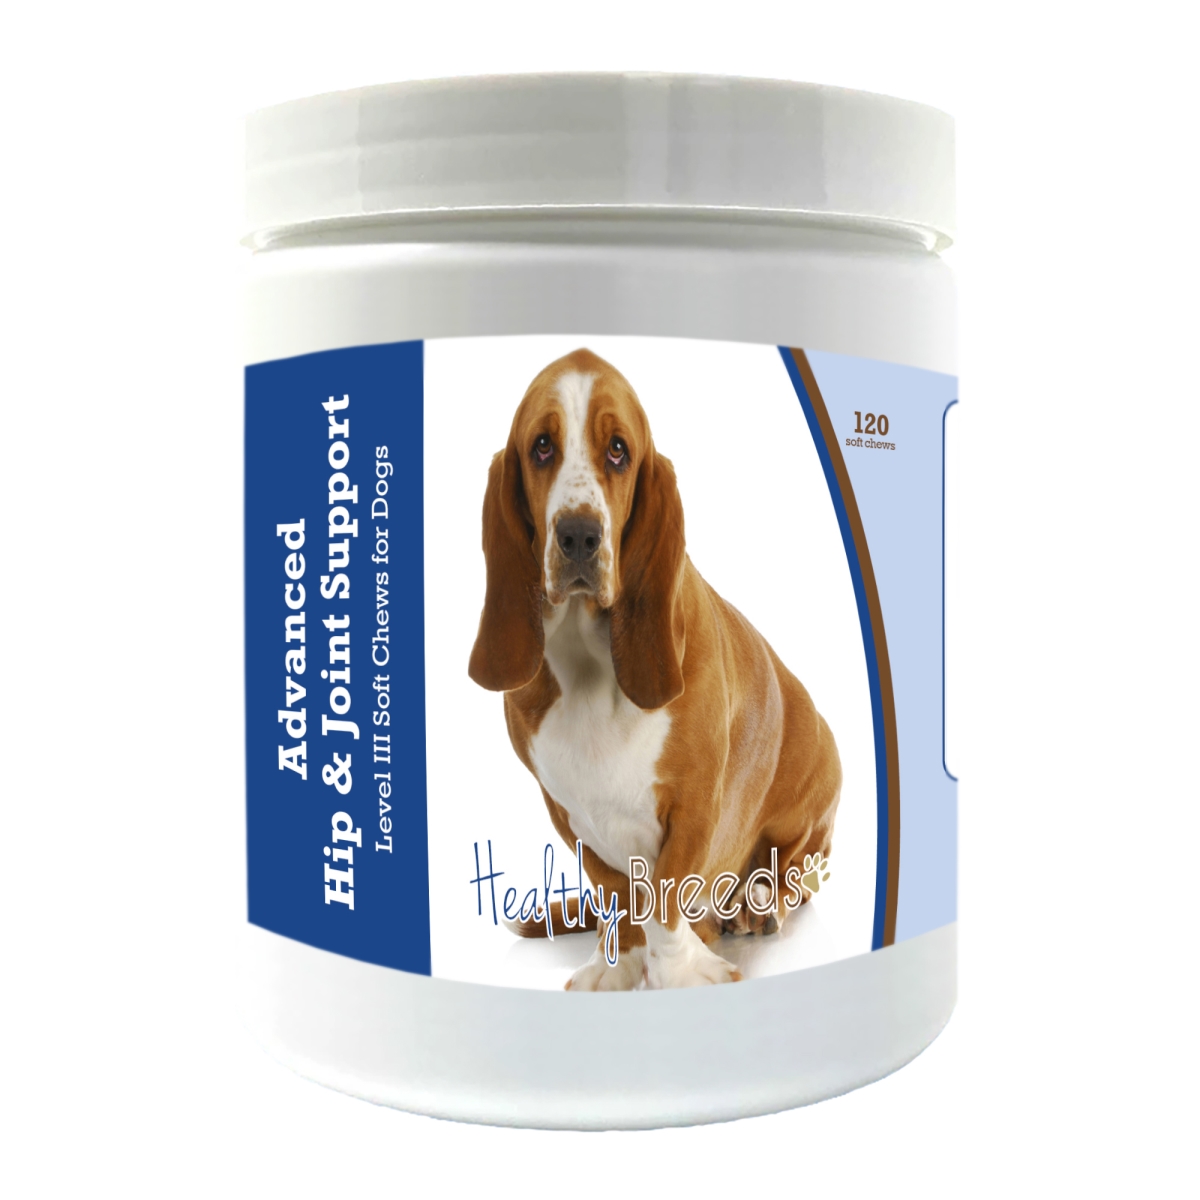 Picture of Healthy Breeds 192959897524 Basset Hound Advanced Hip & Joint Support Level III Soft Chews for Dogs